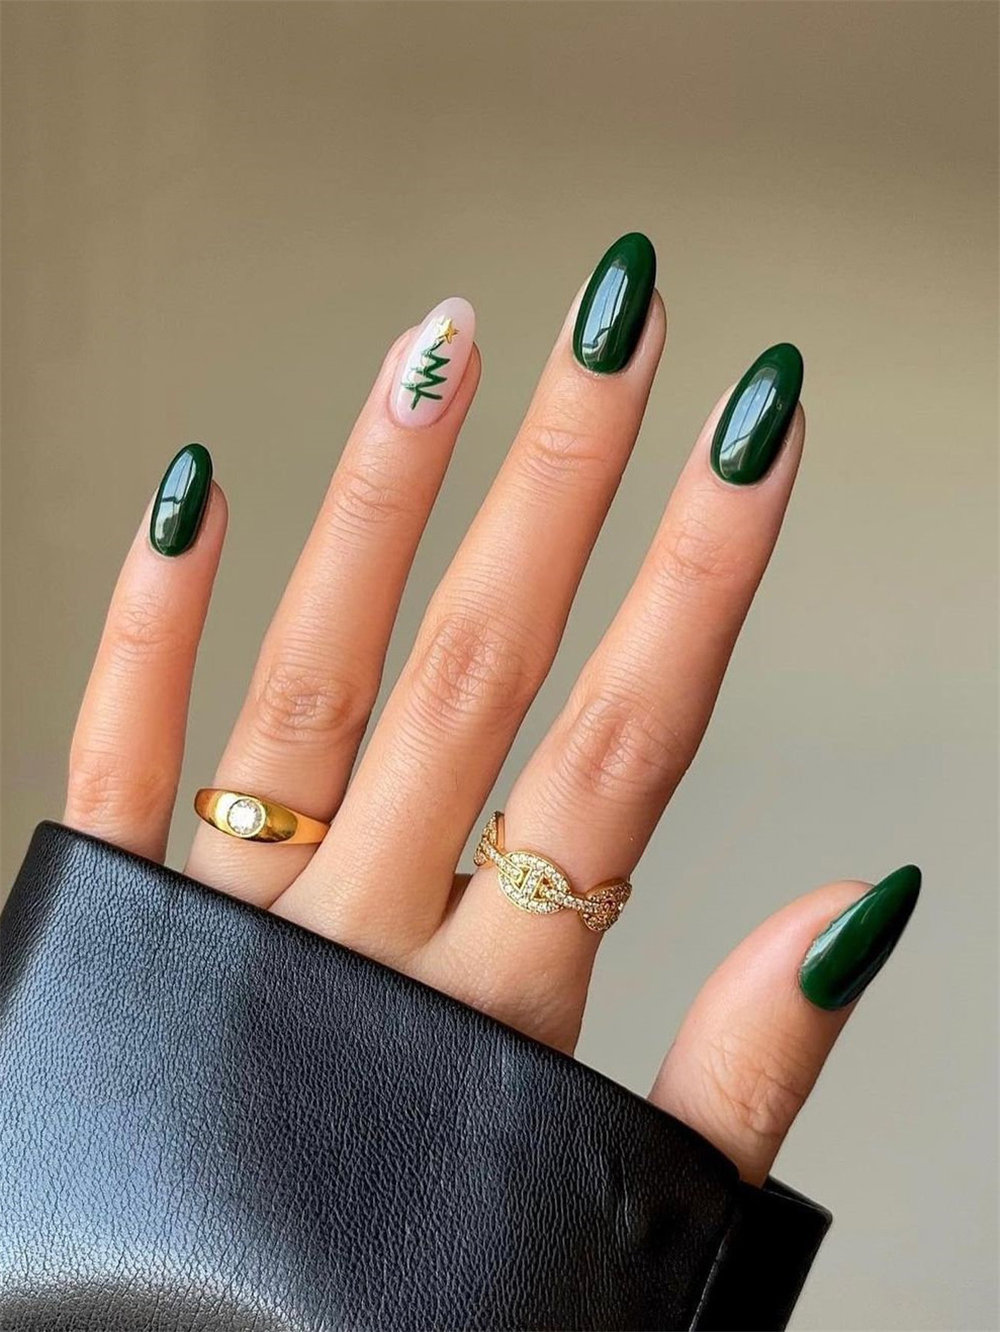 30+ Winter Nails Ideas and Trends You'll Love